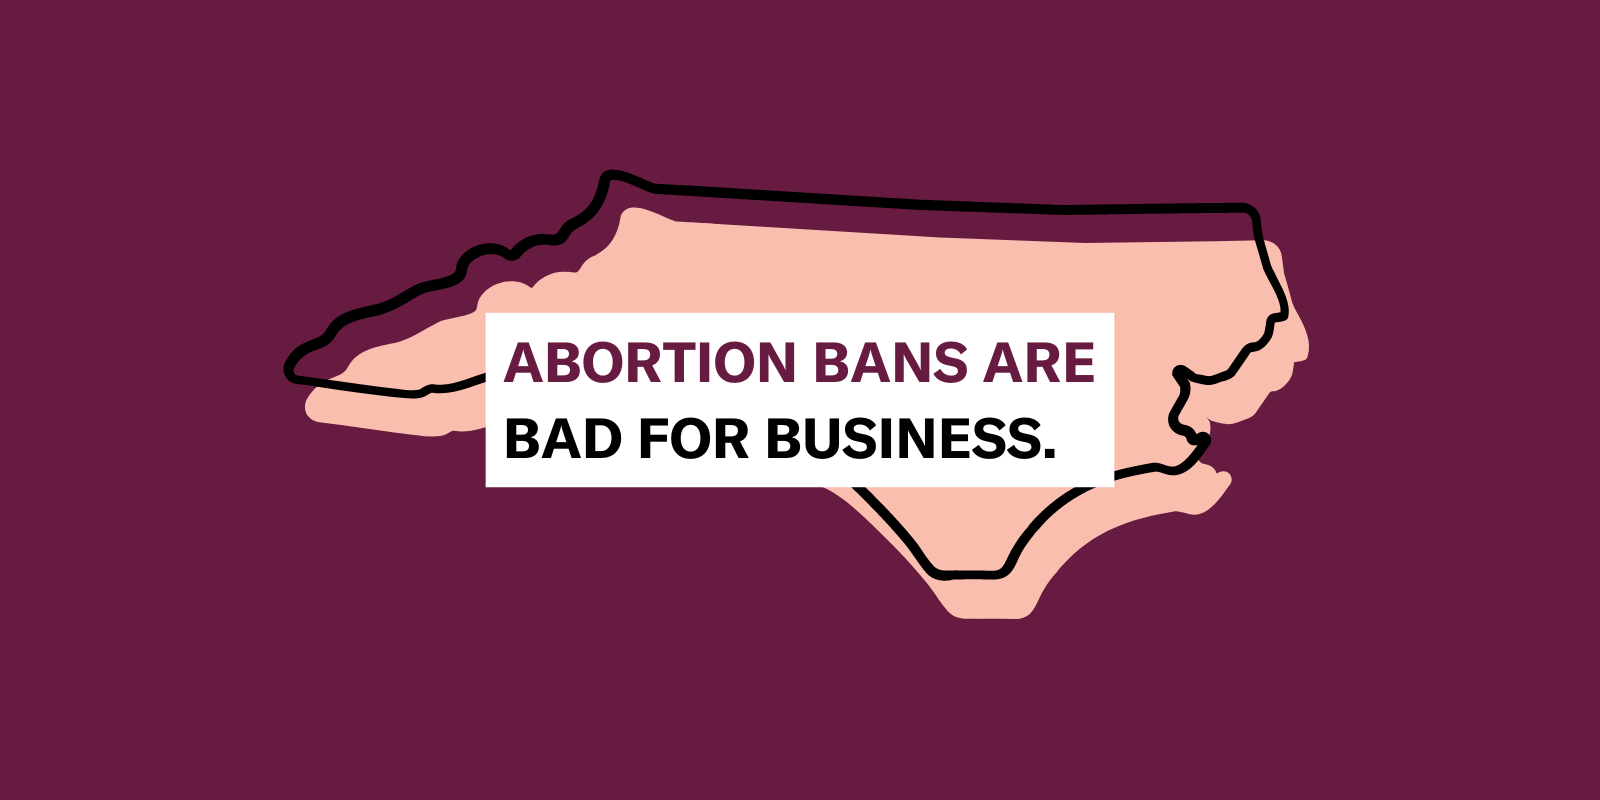 Abortion Bans are Bad for Business